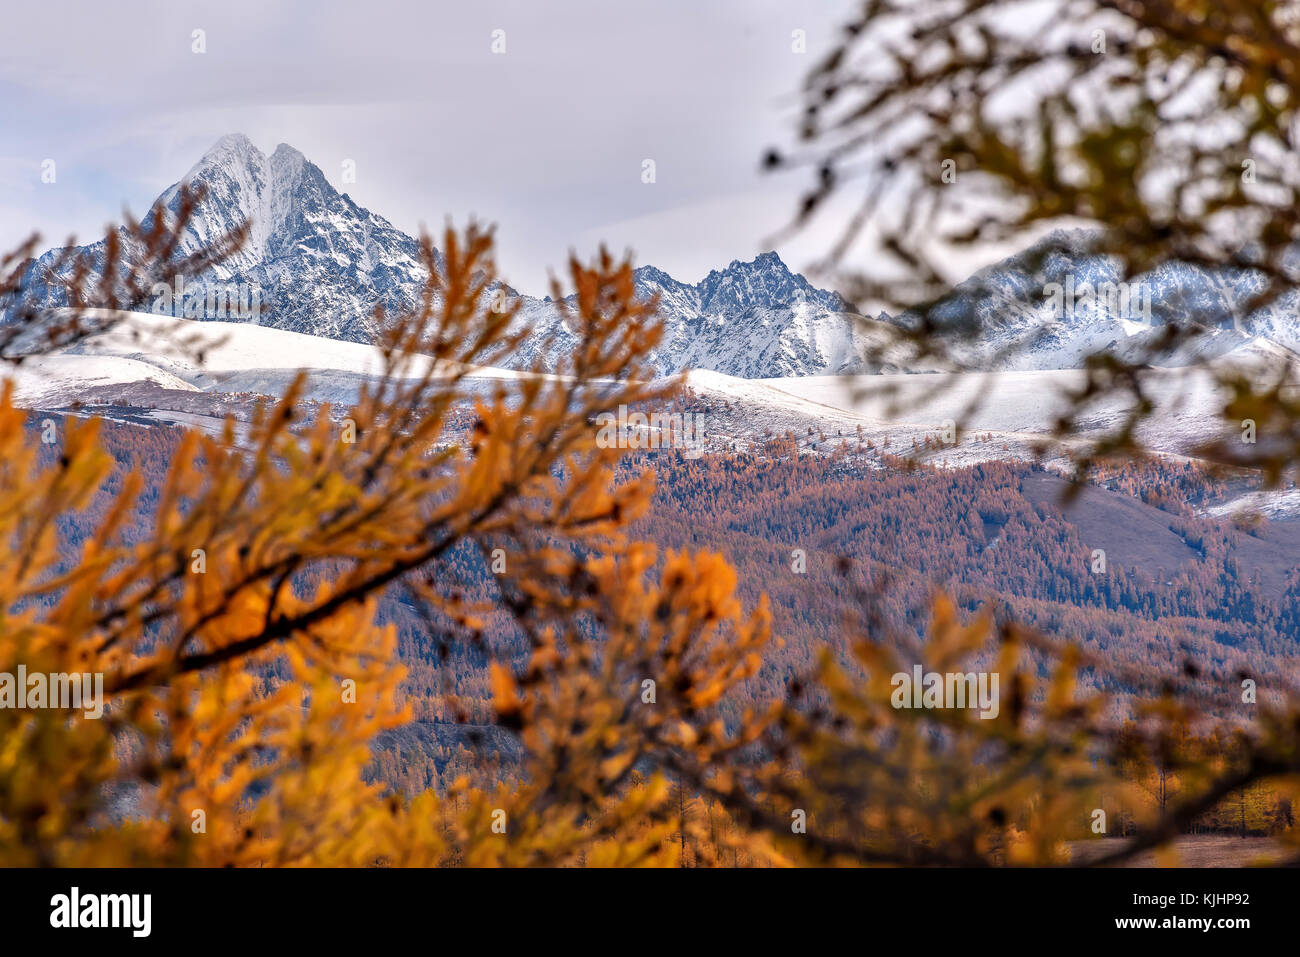 A picturesque autumn view on golden trees and mountains covered with forest and snow through larch branches against the background of a cloudy sky Stock Photo